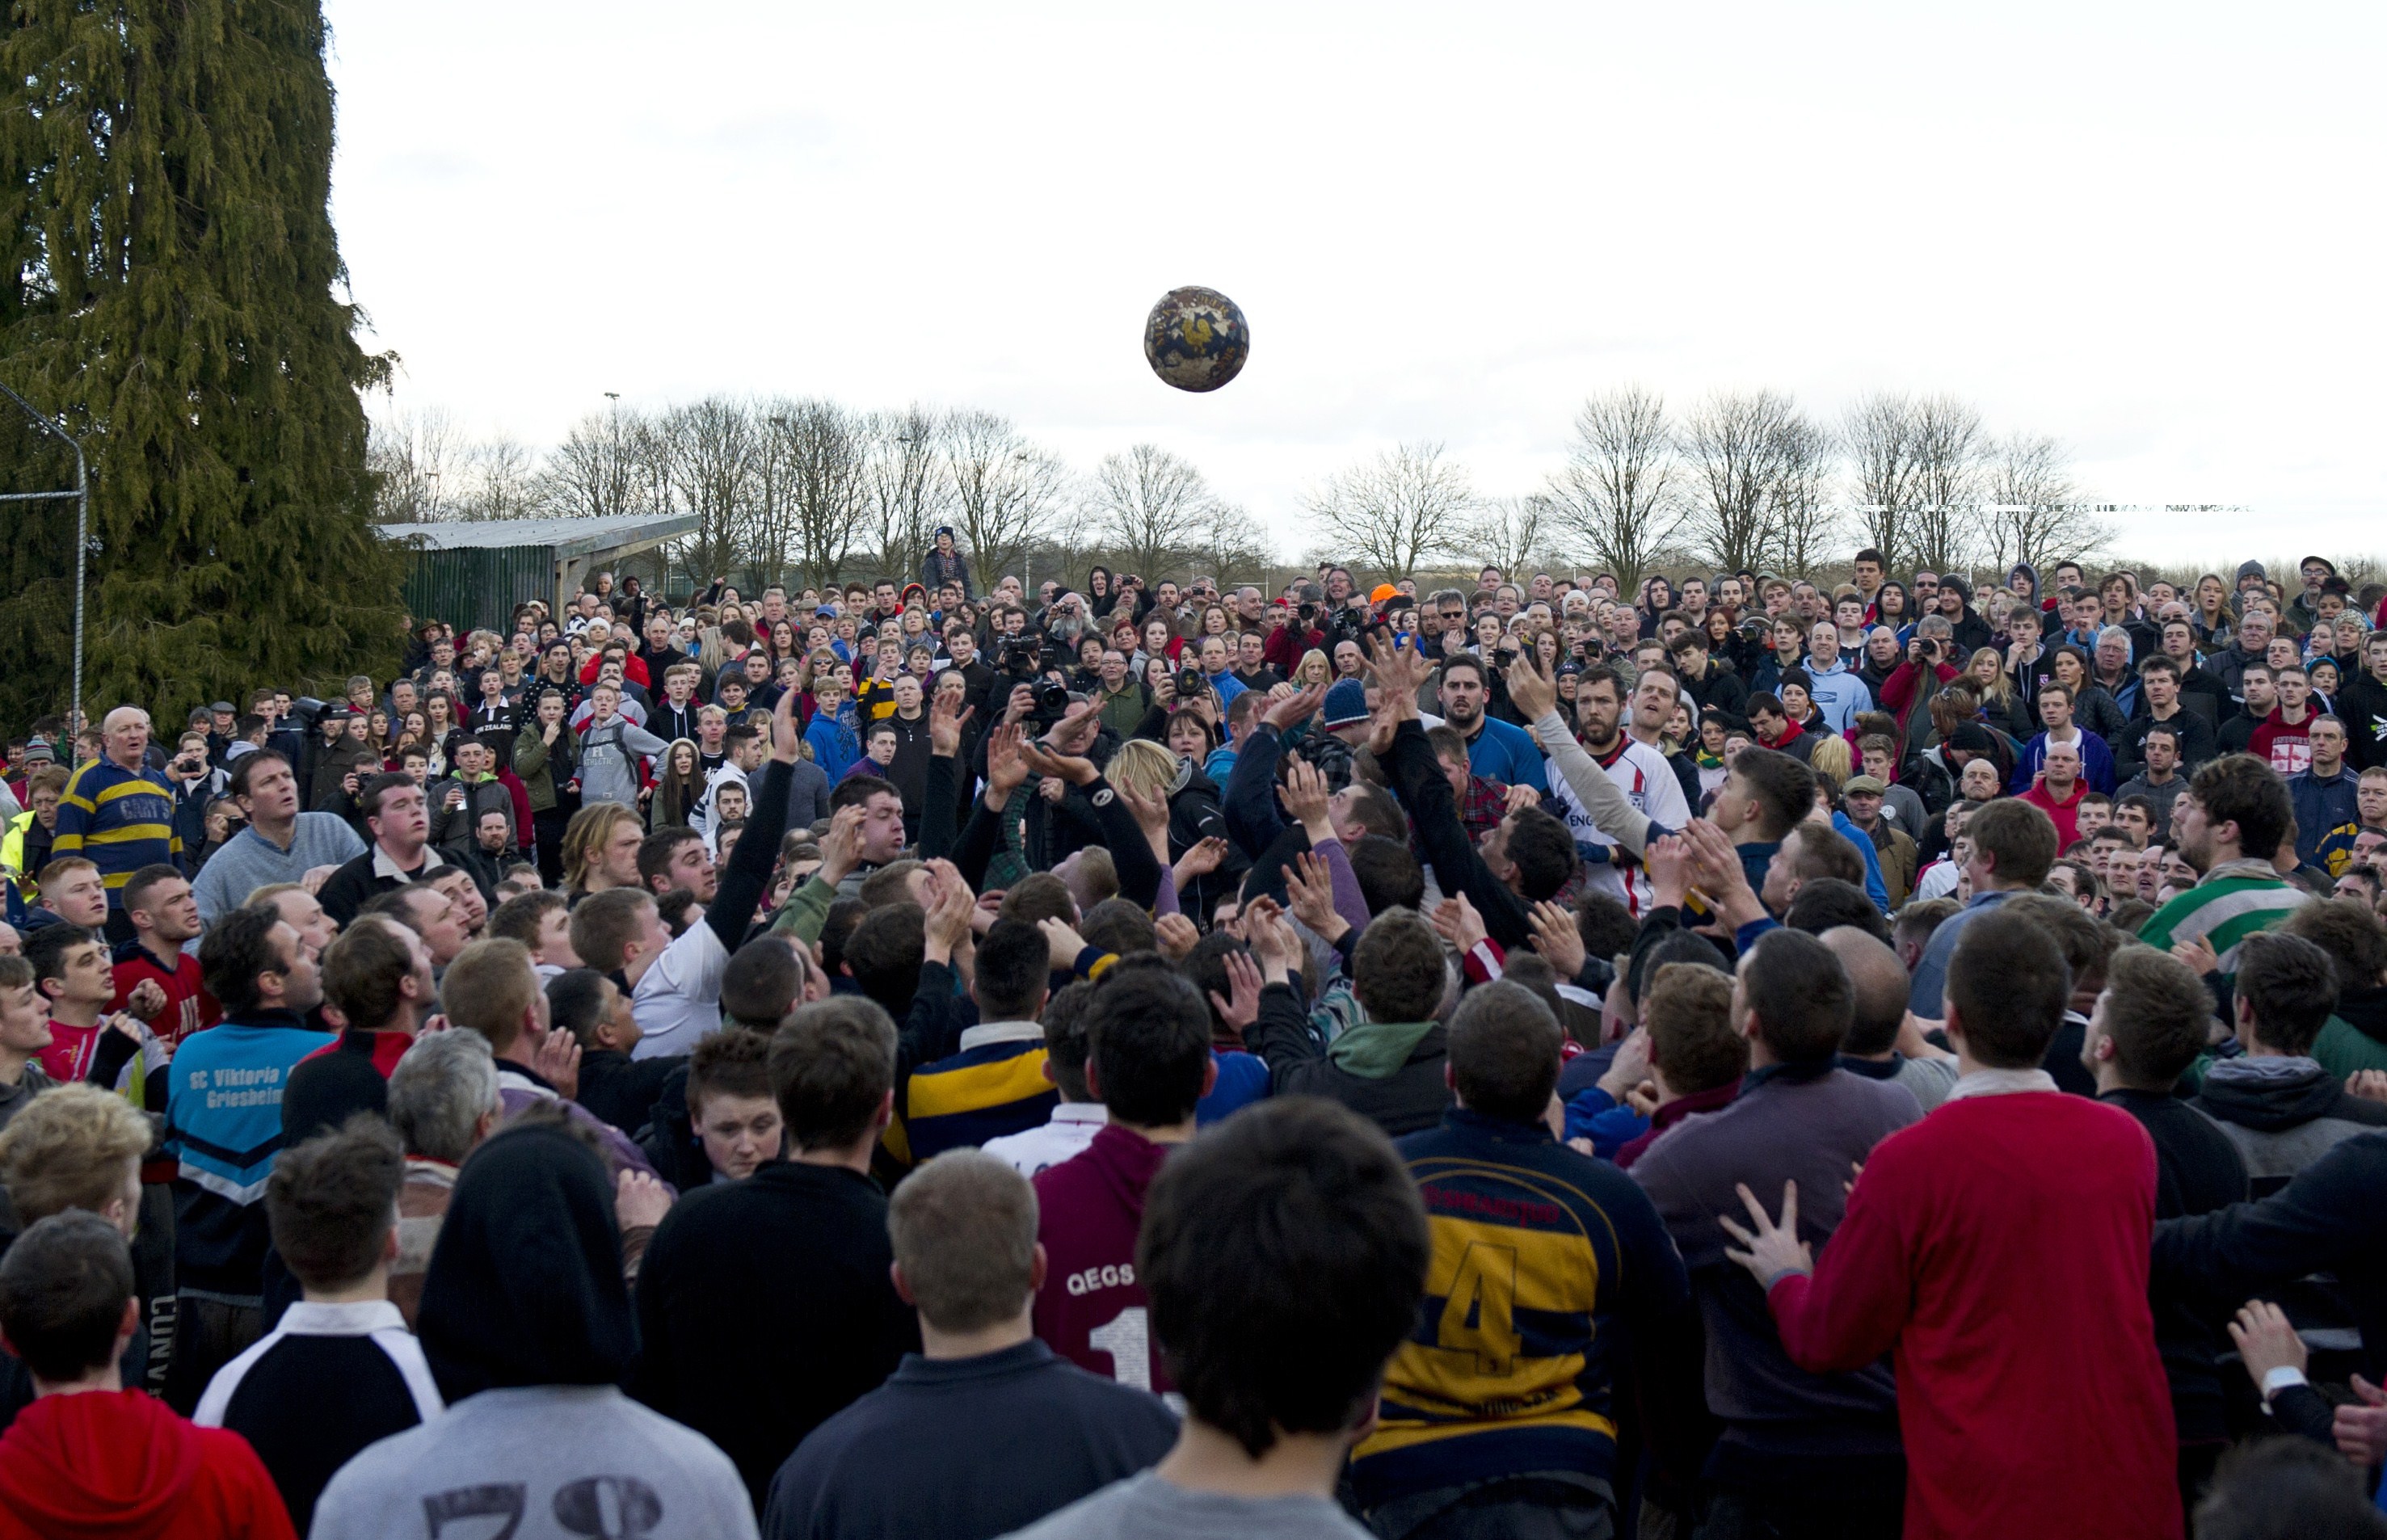 Opposing teams of the Up'ards and the Down'ards compete at the start of the annual Royal Shrovetide Football Match in Ashbourne, Derbyshire, England on February 17, 2015. (Oli Scarff—AFP/Getty Images)